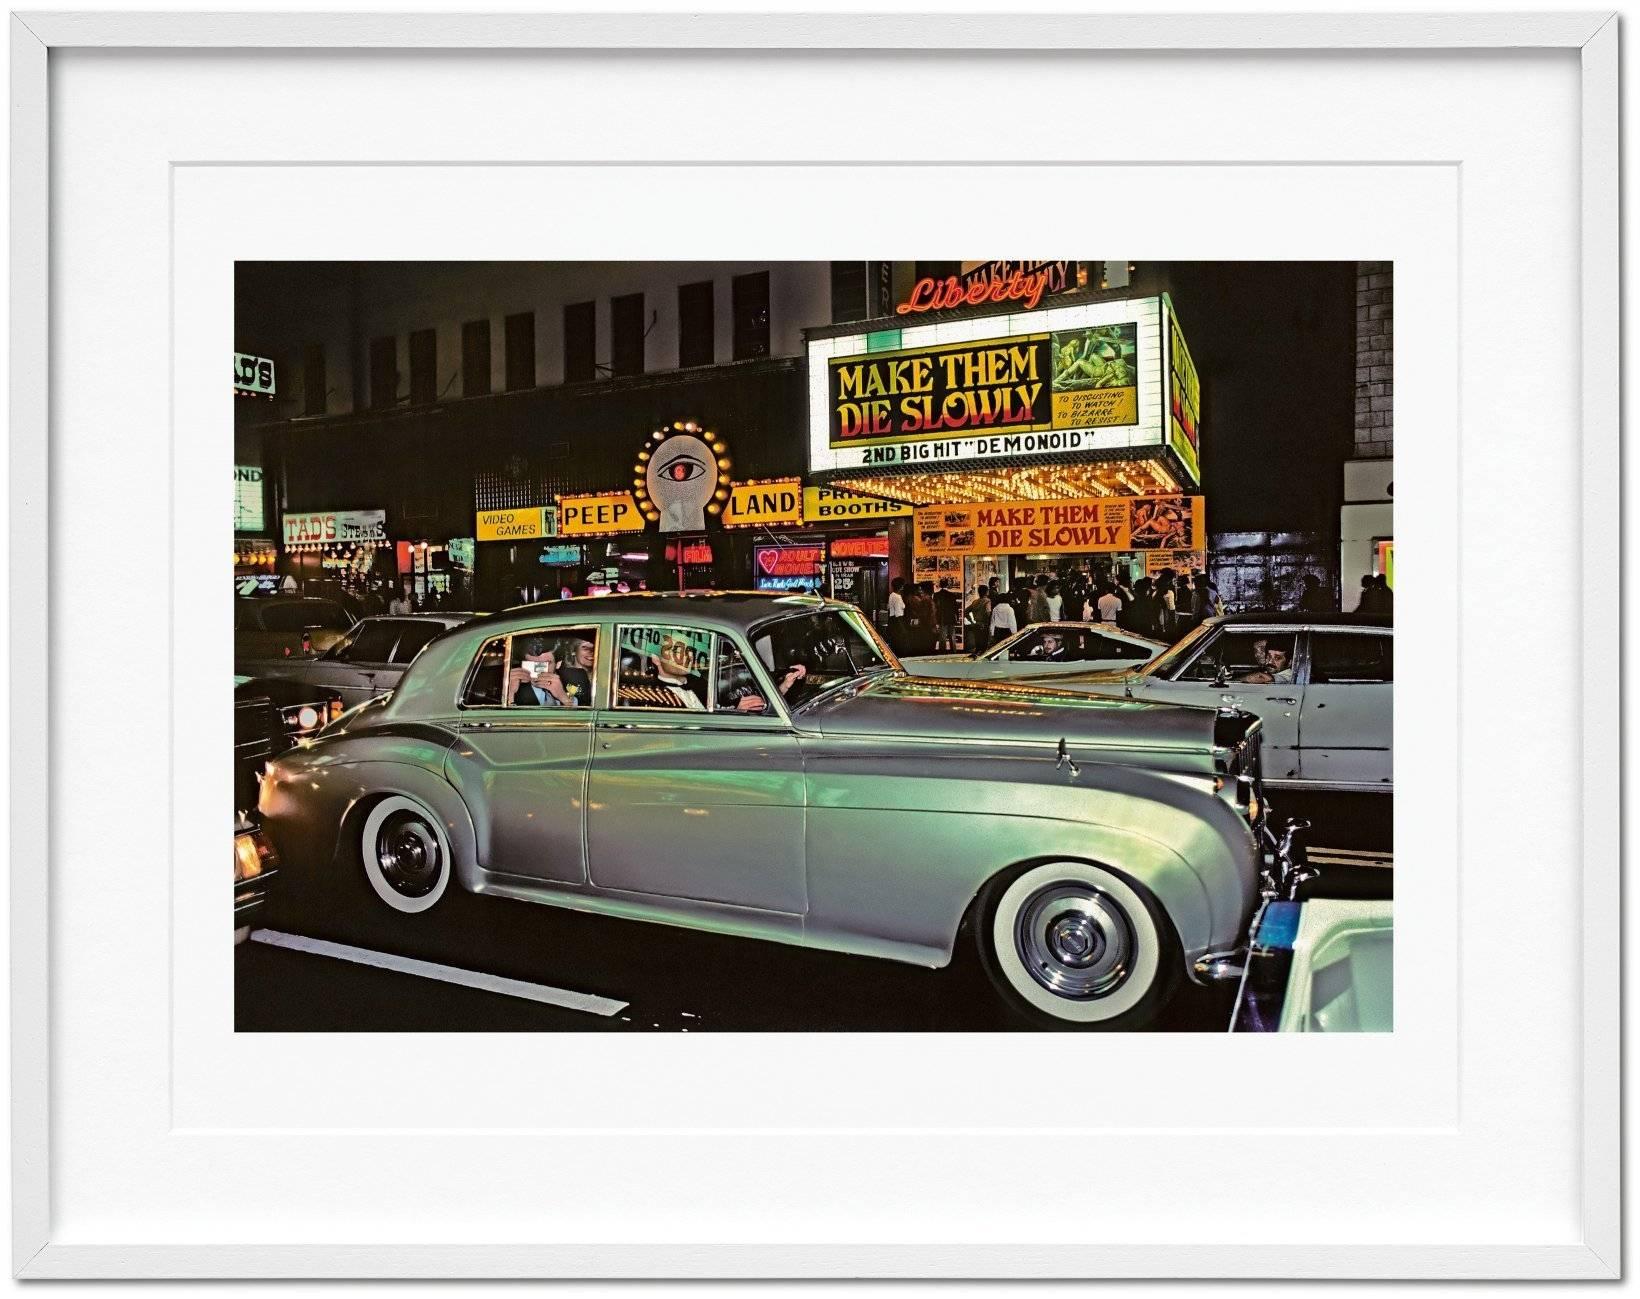 A stately Art Edition presenting the first major career retrospective of Marvin E. Newman, with some 170 featured images as well as signed photographic print 42nd Street, 1983, a scene of intense urban drama.

Art Edition (225–300), with the print